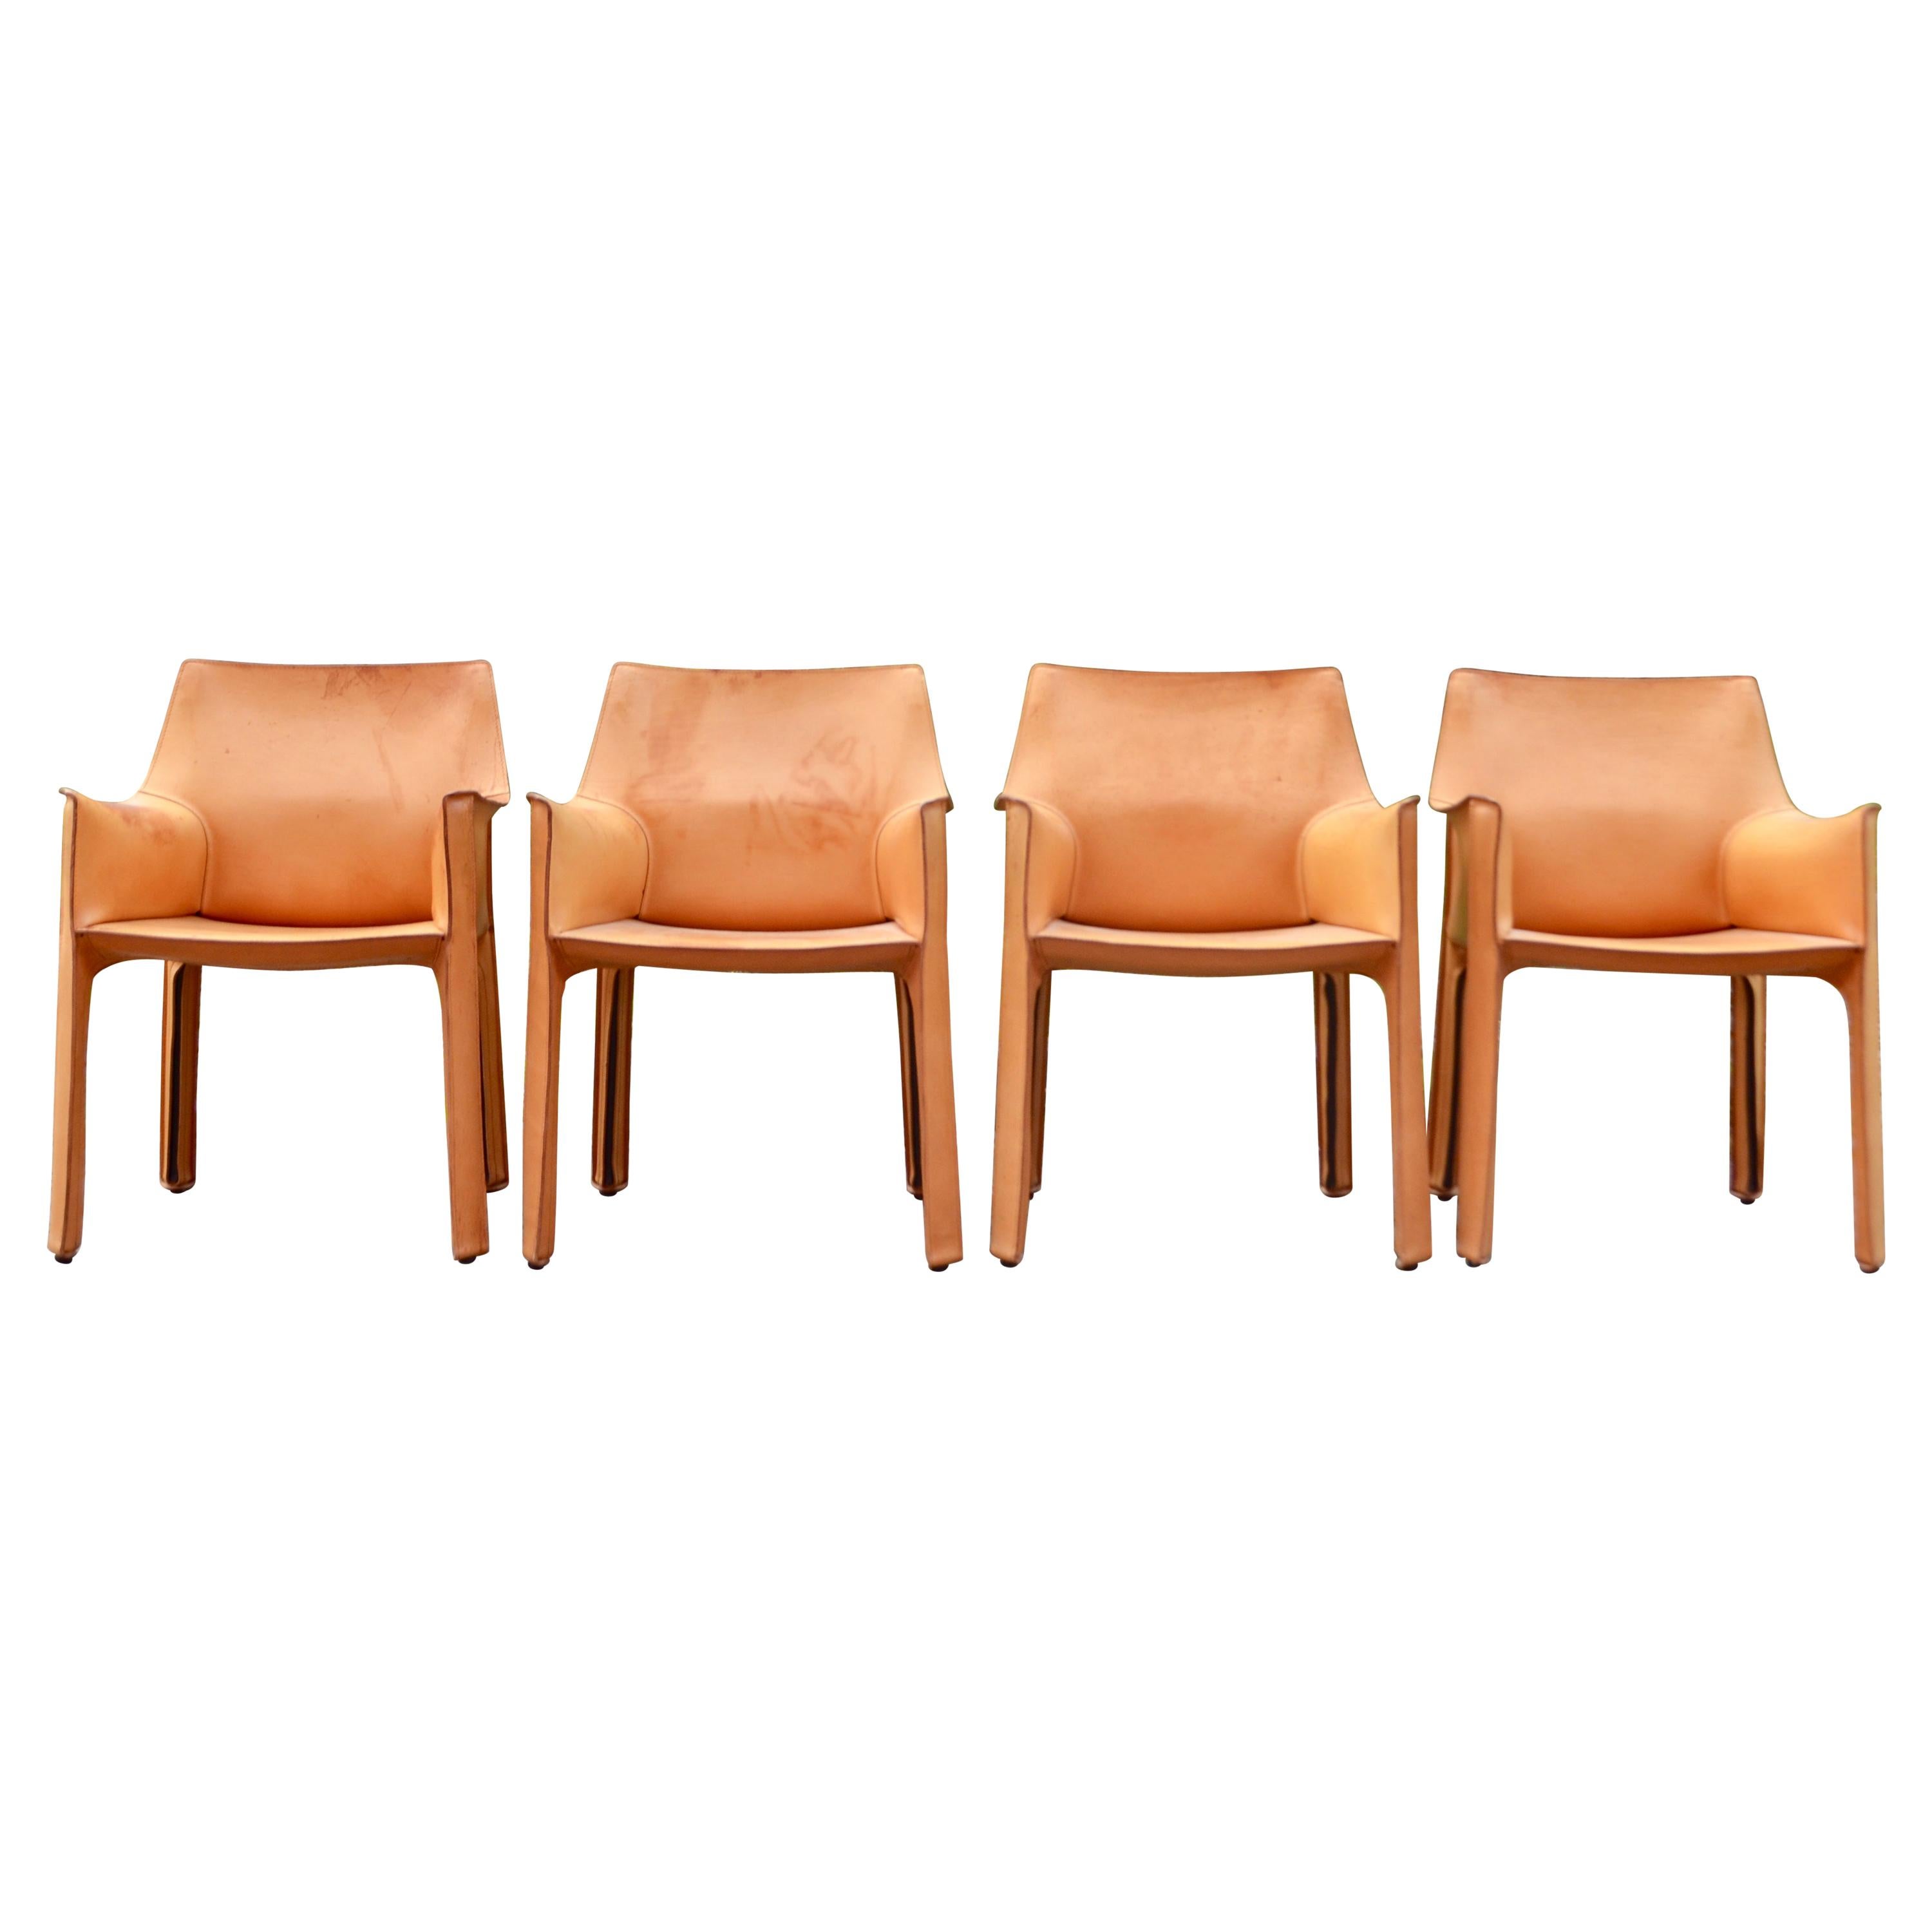 Cassina Cab 413 Vegetal Natural Cognac Leather Dining Chair Armchair Set of 4